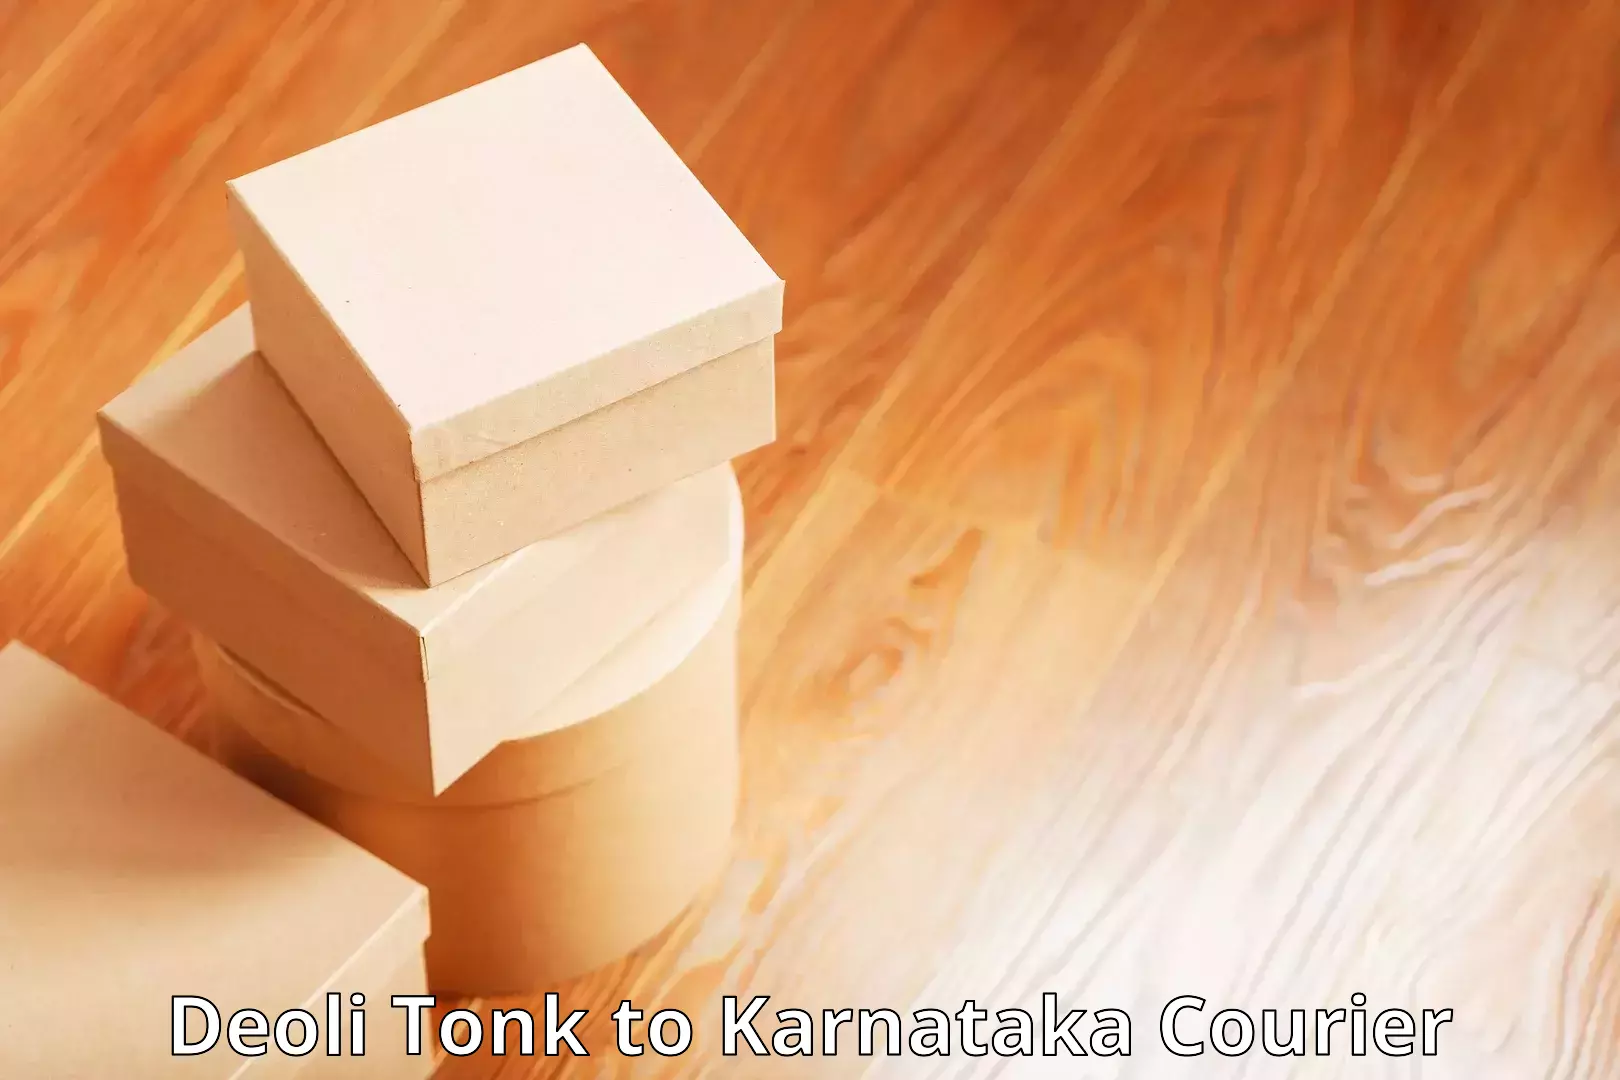 Custom courier packages Deoli Tonk to Bangalore